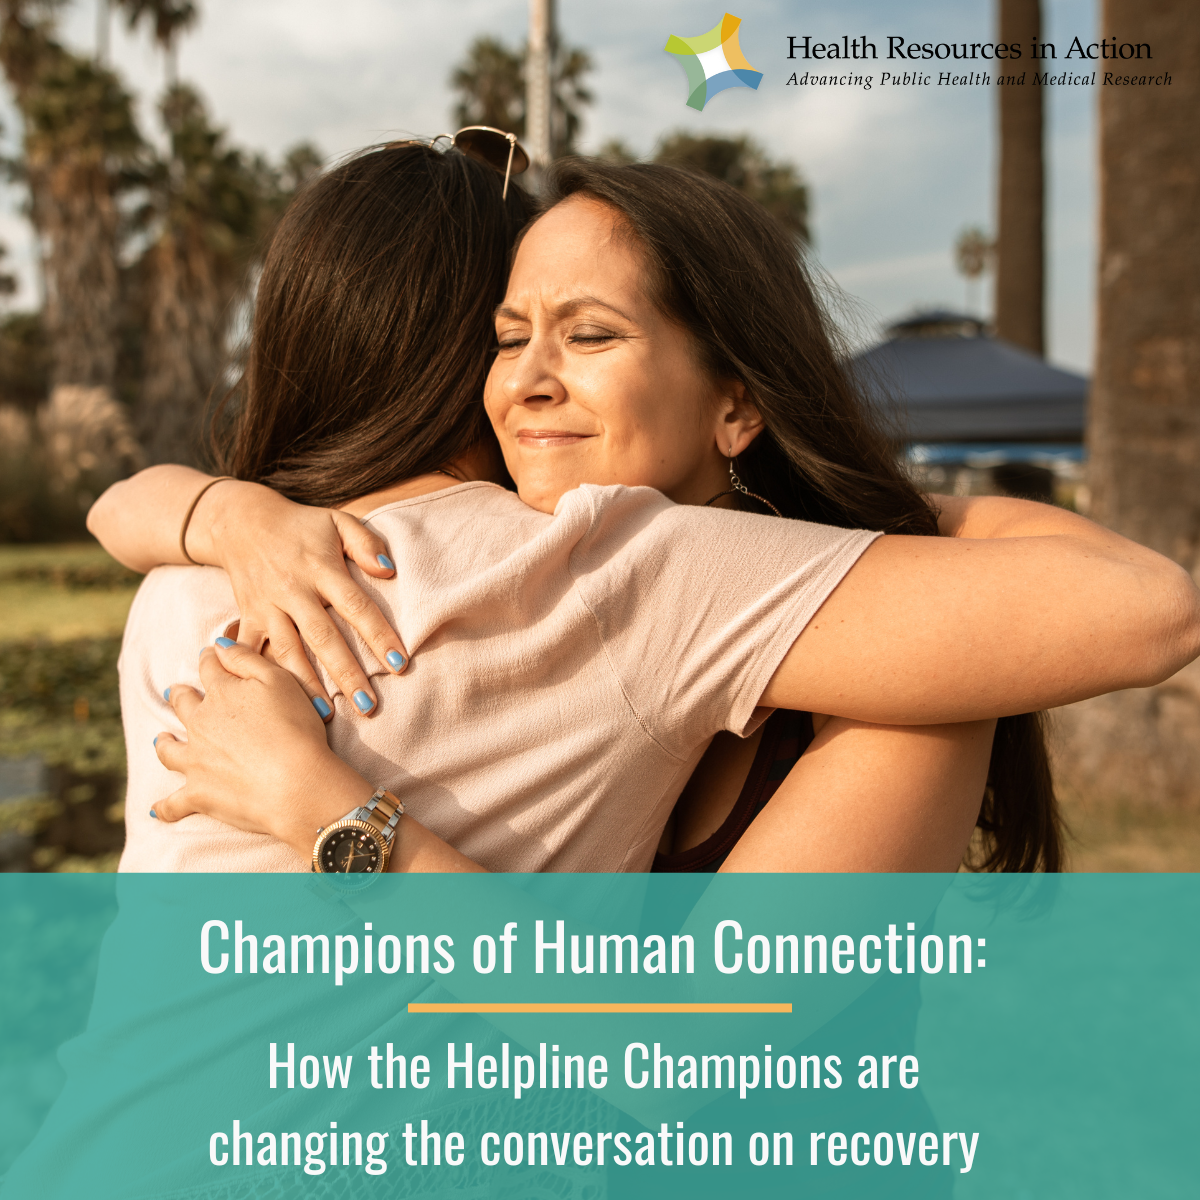 Two women embracing, with text overlay: Champions of Human Connection: How the Helpline Champions are changing the conversation on recovery